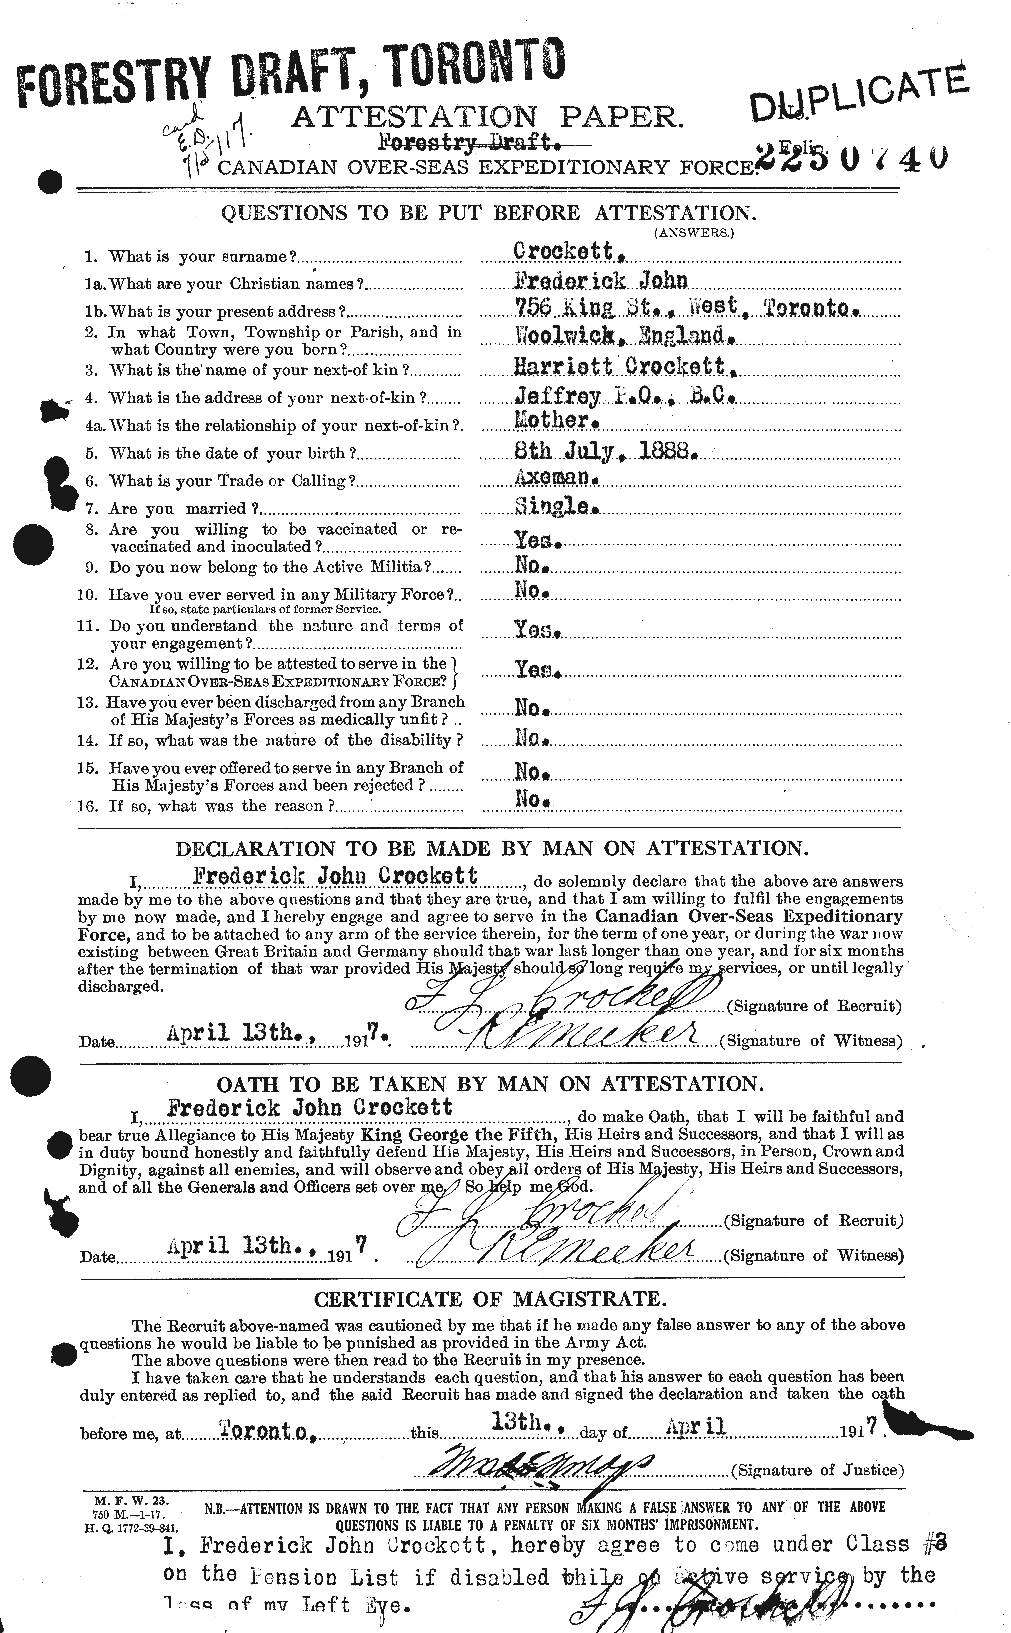 Personnel Records of the First World War - CEF 064711a